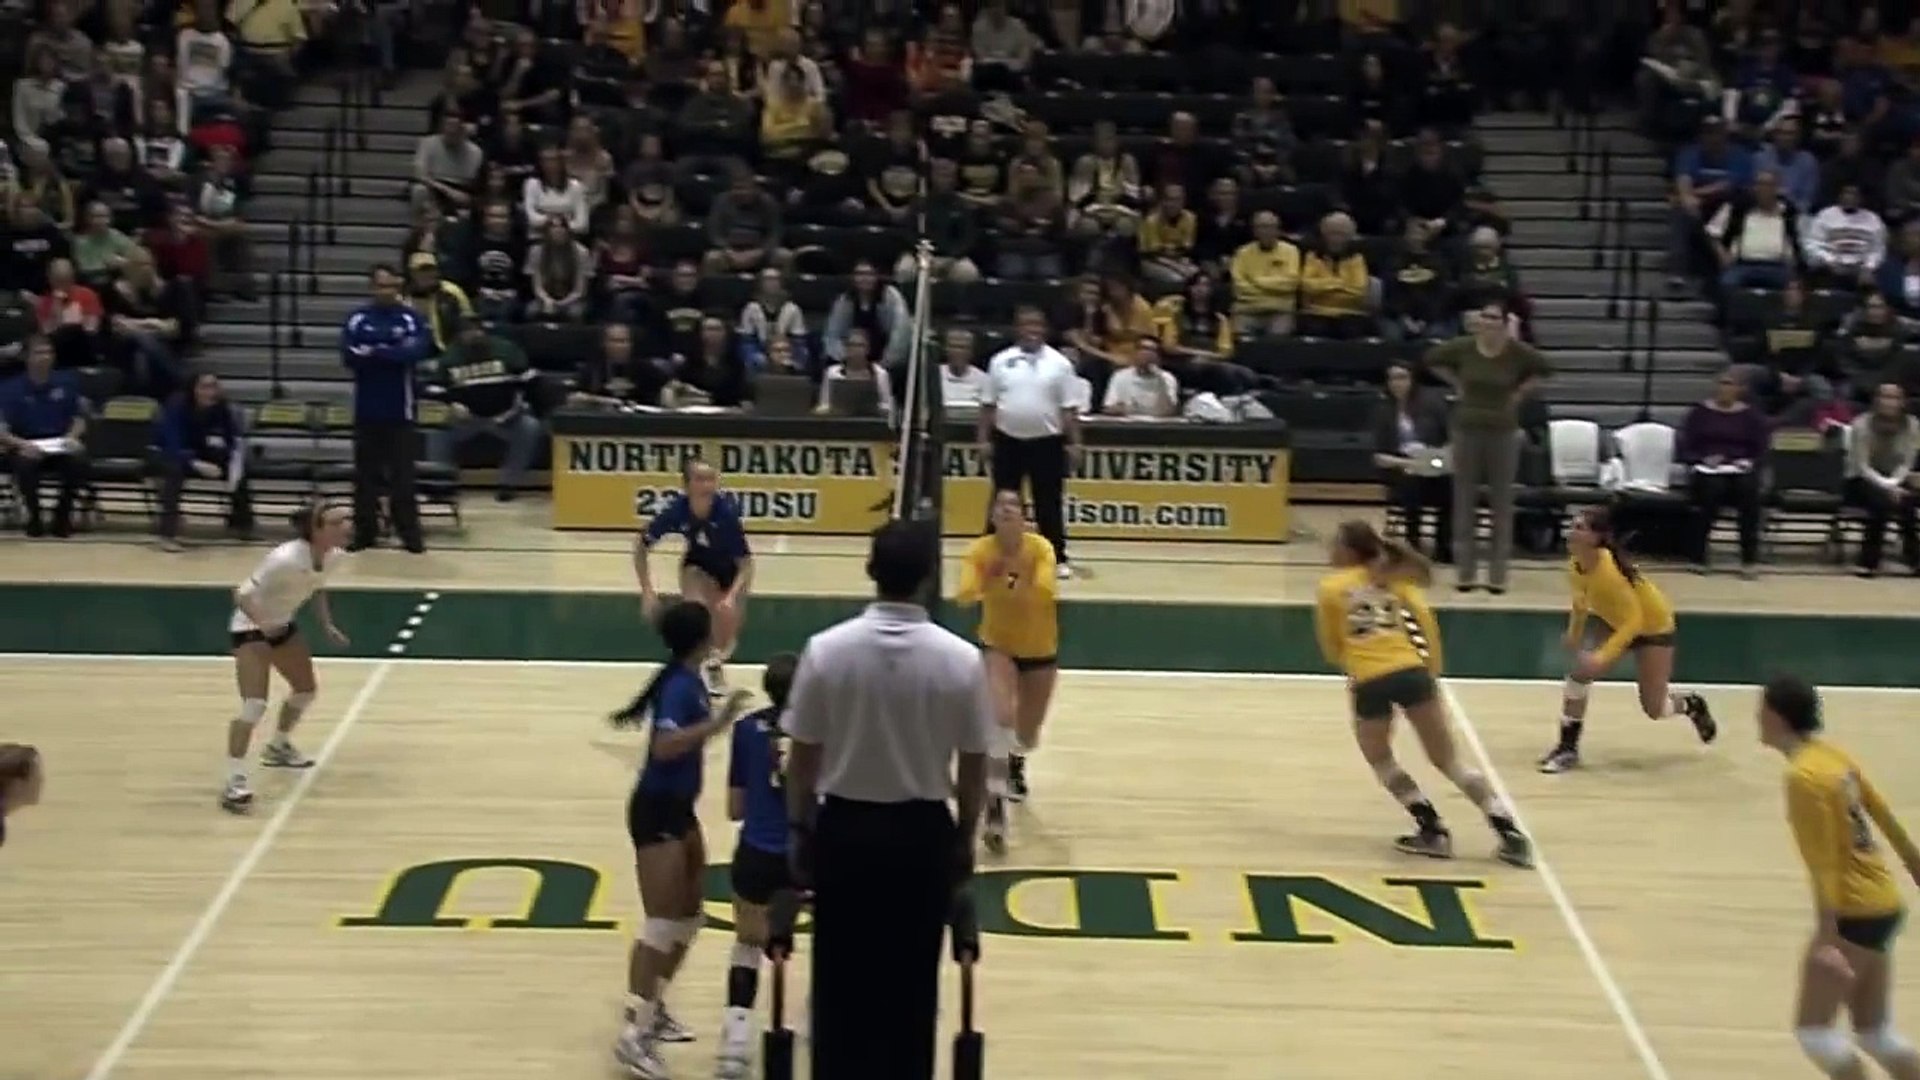 2012 Bison Volleyball Highlight Video